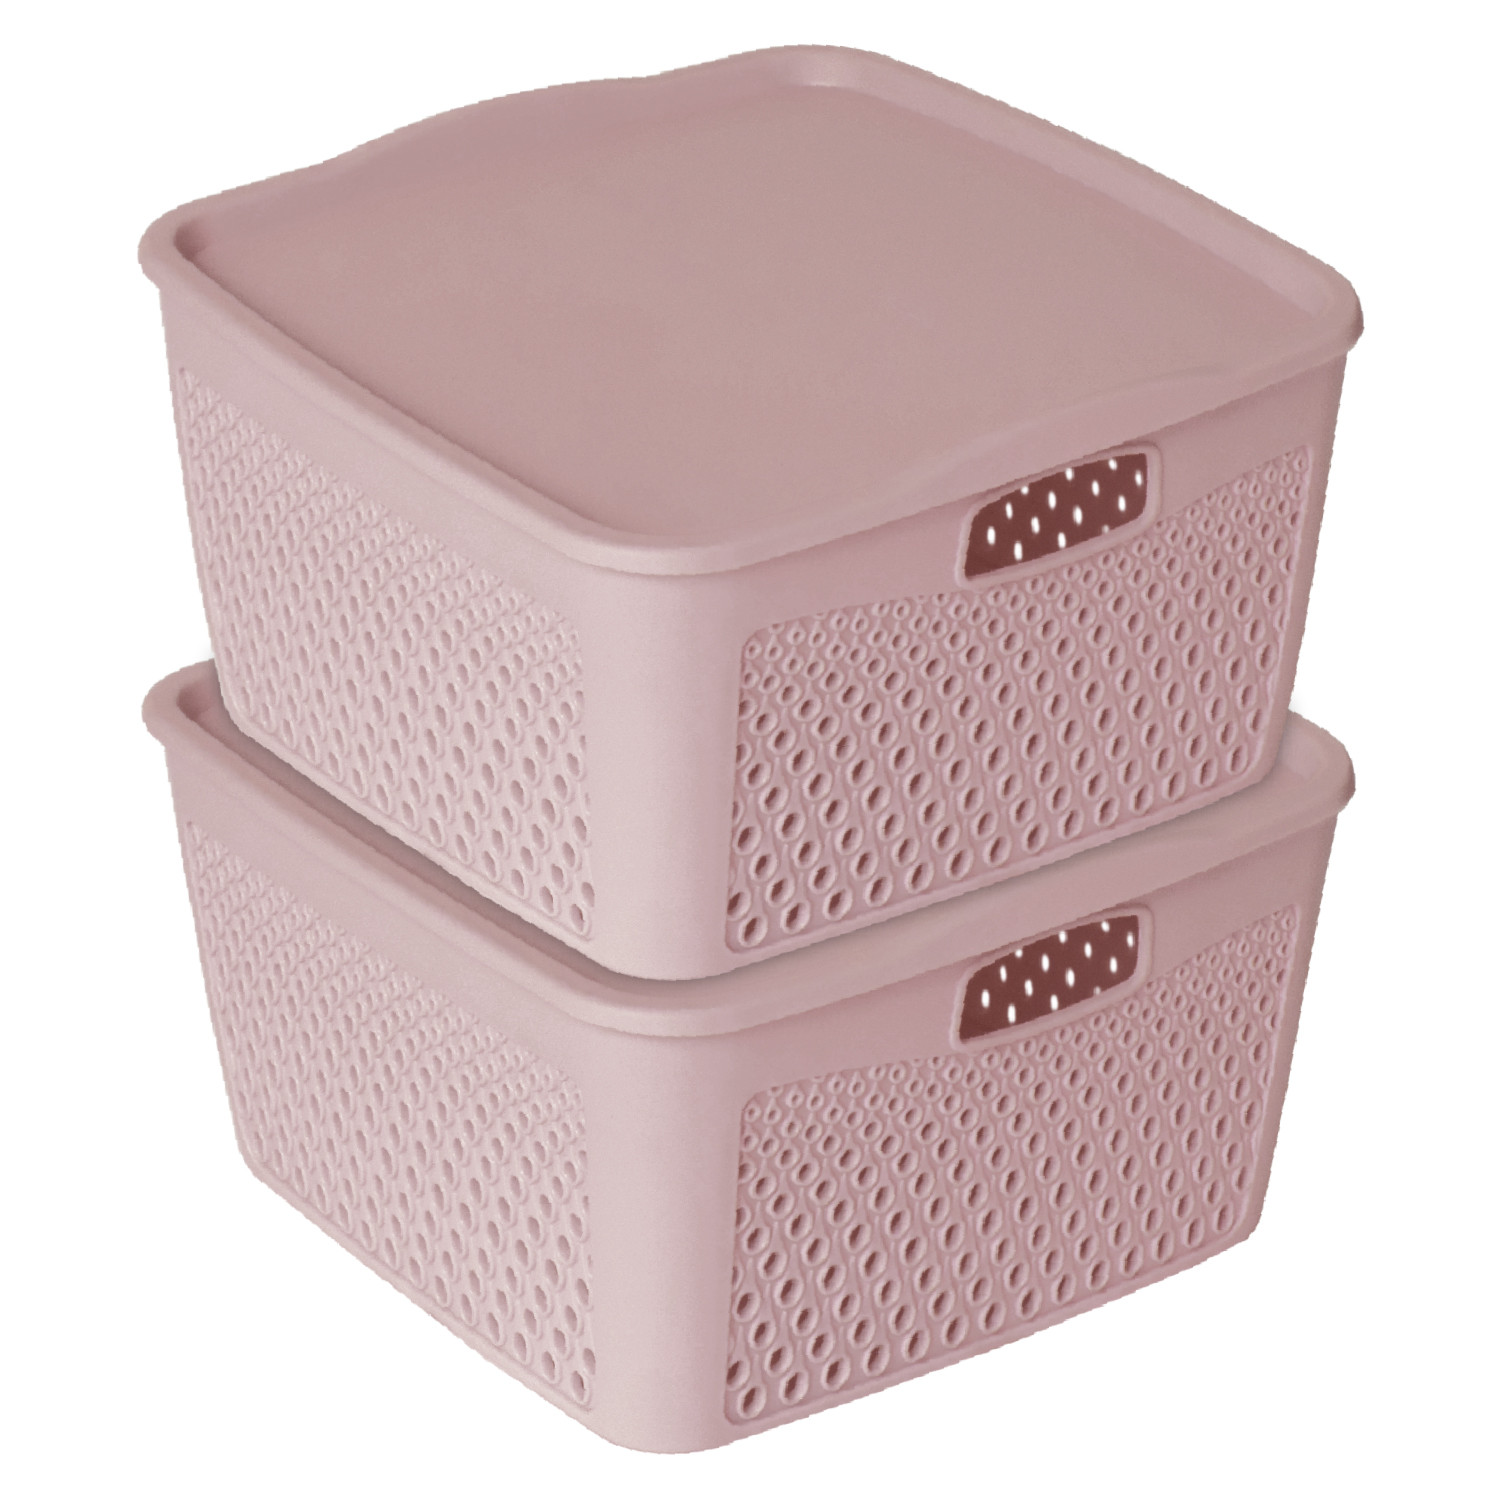 Kuber Industries Netted Design Unbreakable Multipurpose Square Shape Plastic Storage Baskets with lid Large (Grey)